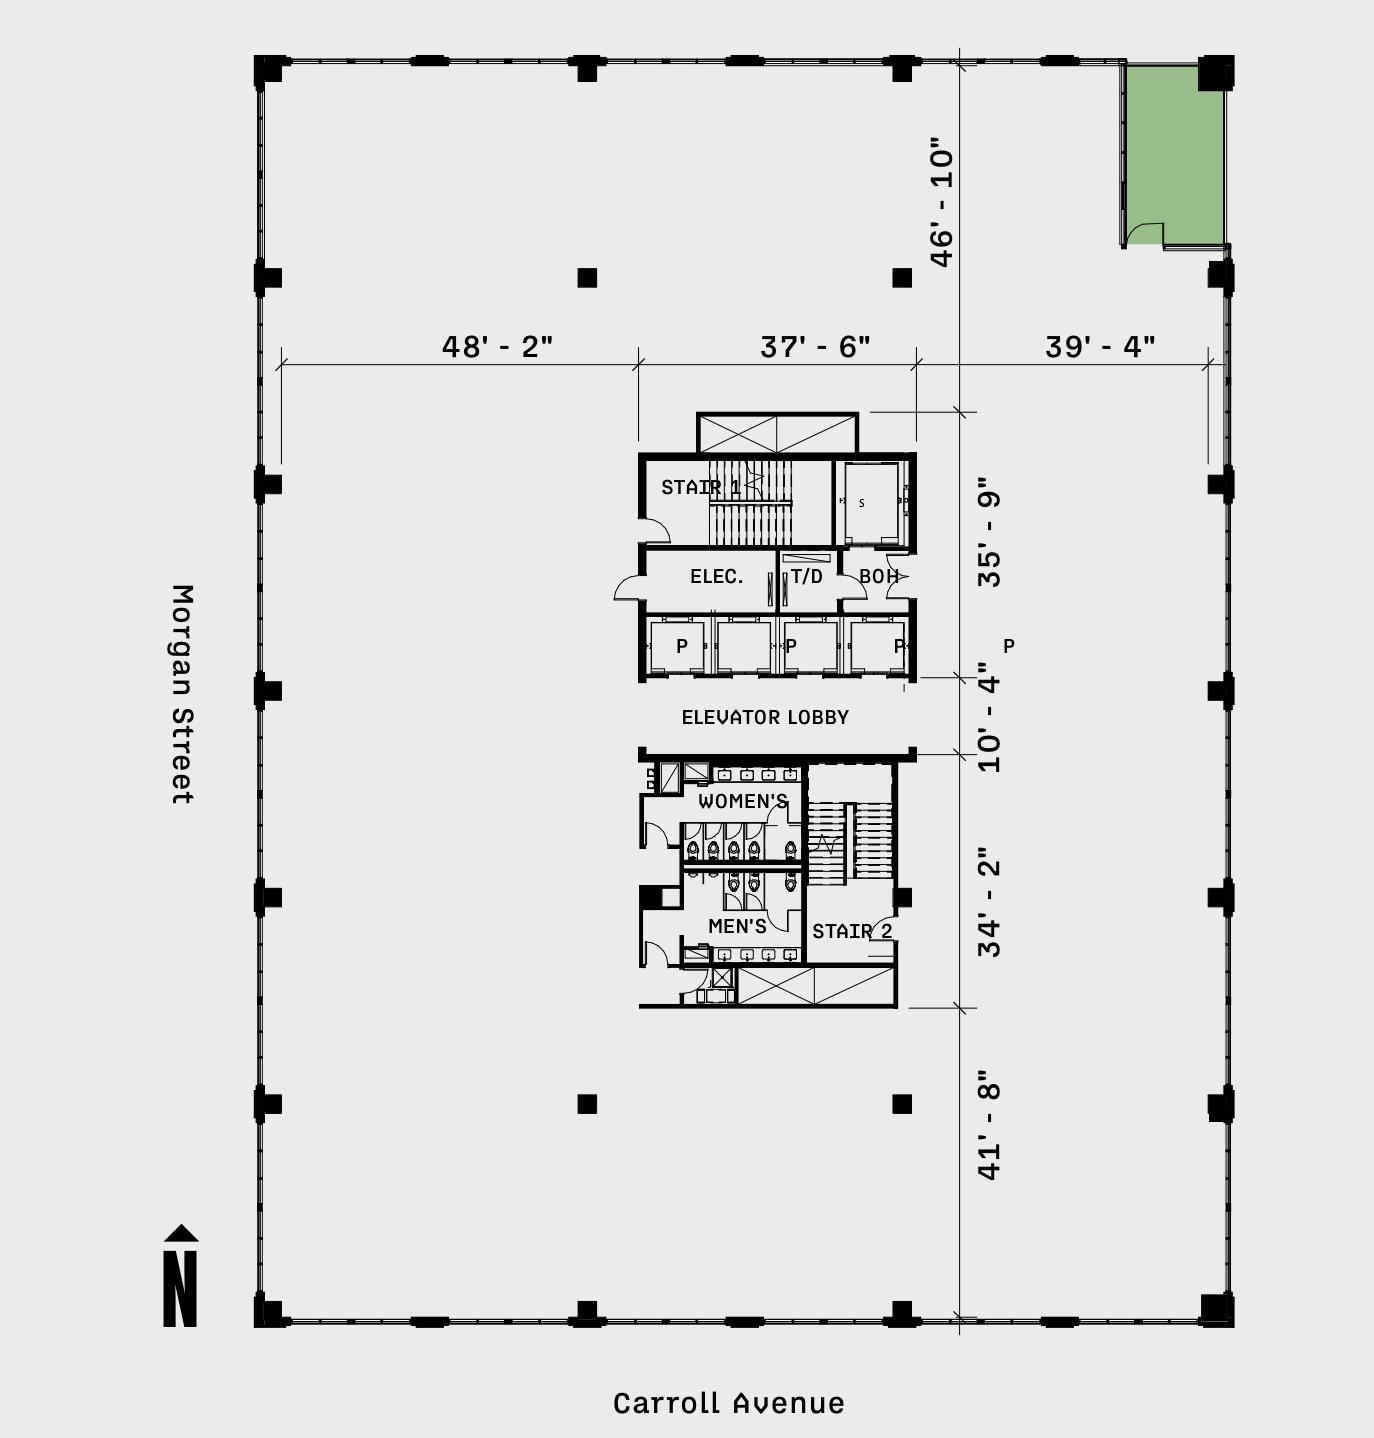 345 N Morgan Street typical office layout